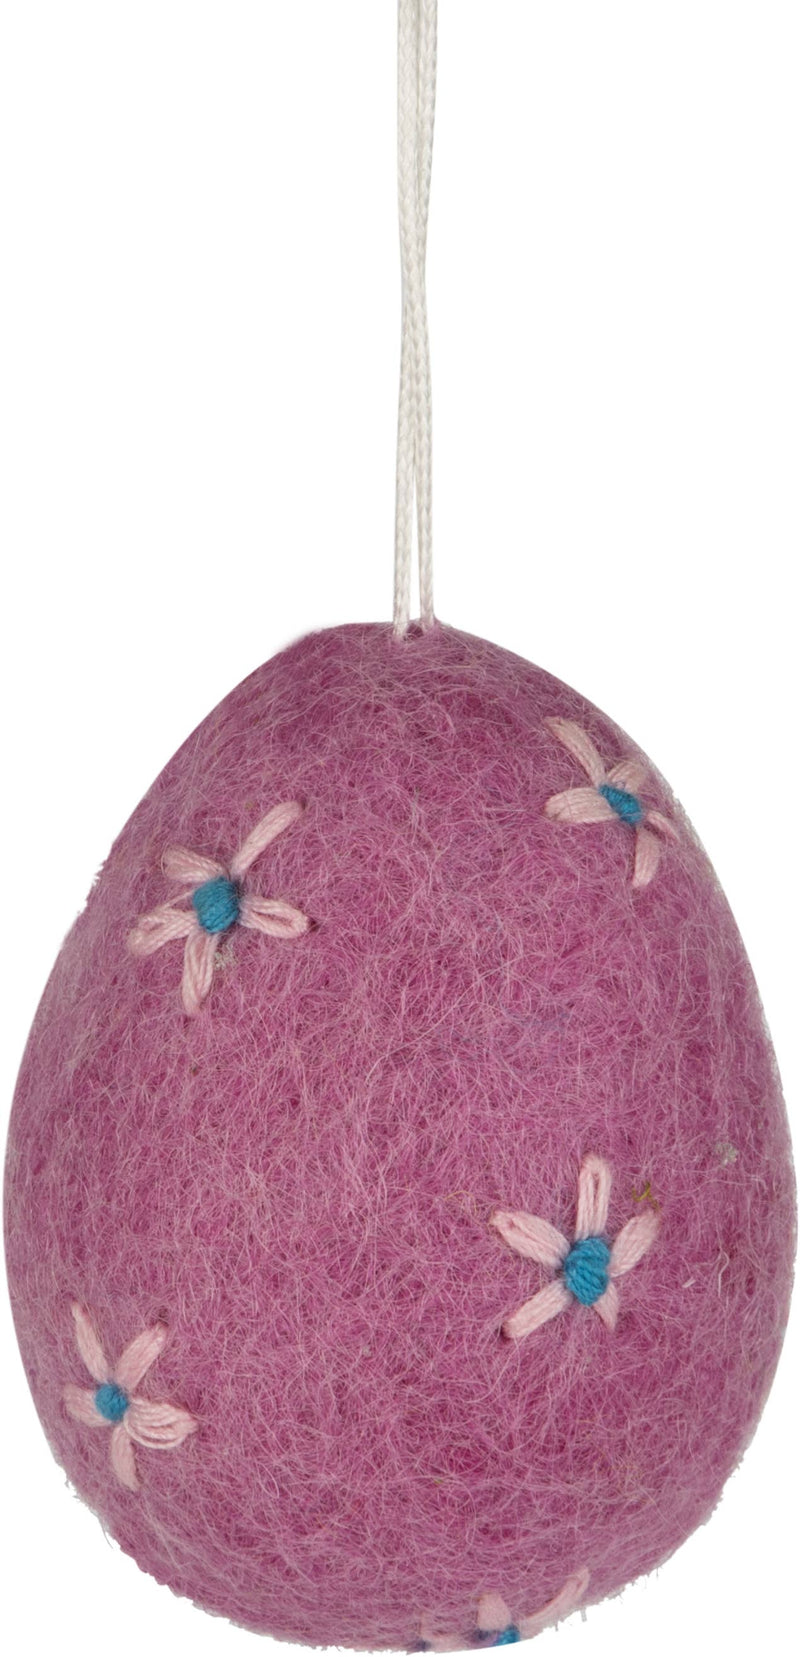 A50524:Felt egg ornament, embroidered daisy pattern, pink